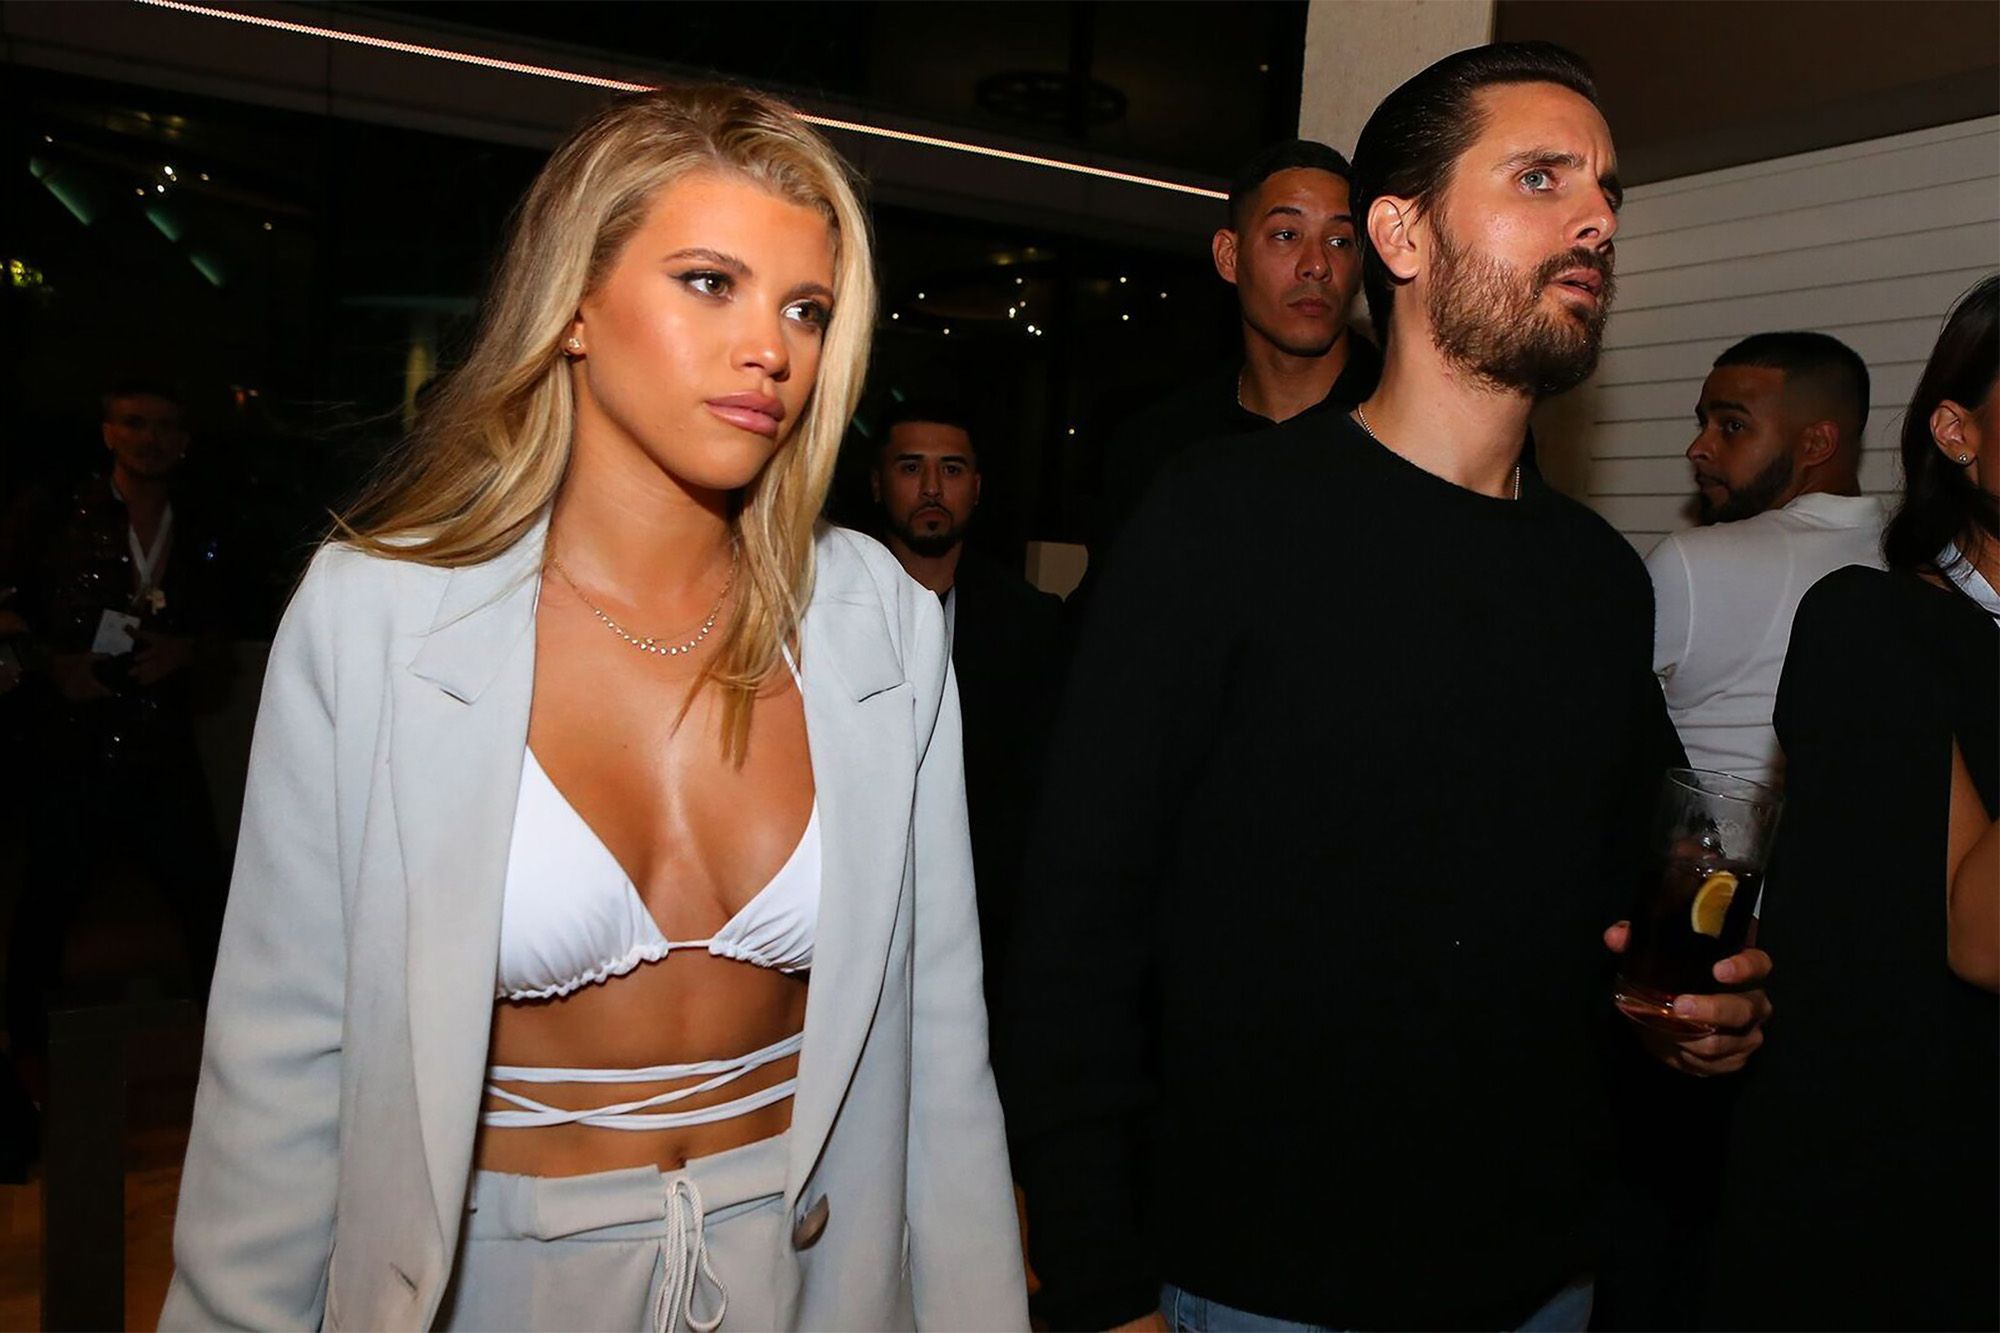 Sofia Richie flaunts her envy-inducing abs in a TINY pink bikini as she gushes about ‘living her best life’ in saucy Instagram snap